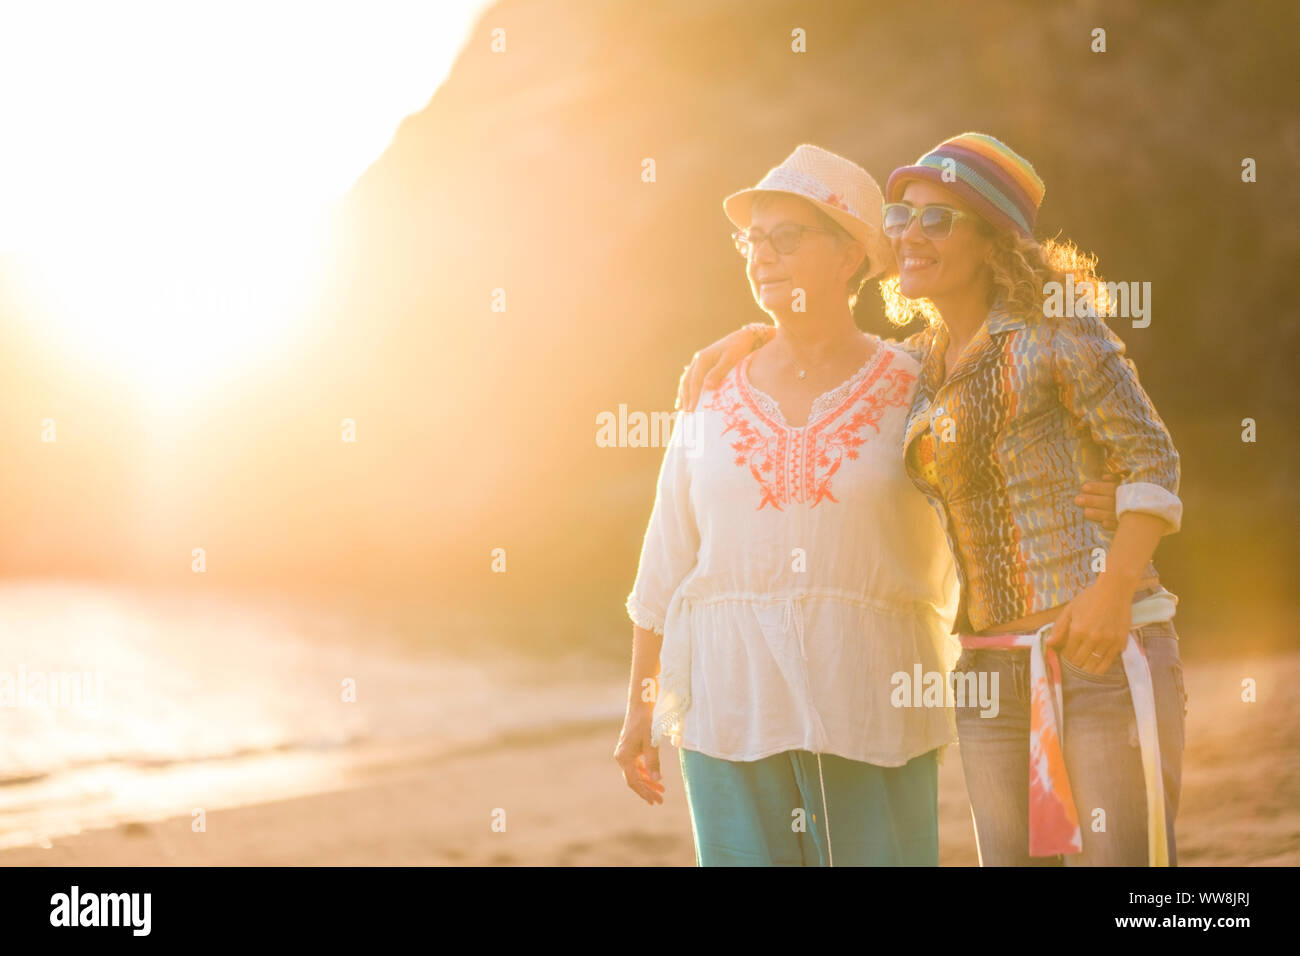 couple of friends females outdoor at the beach during a beautiful sunset with golden light. ocean and shore in background for vacation concept iand relationship with young and woman people Stock Photo